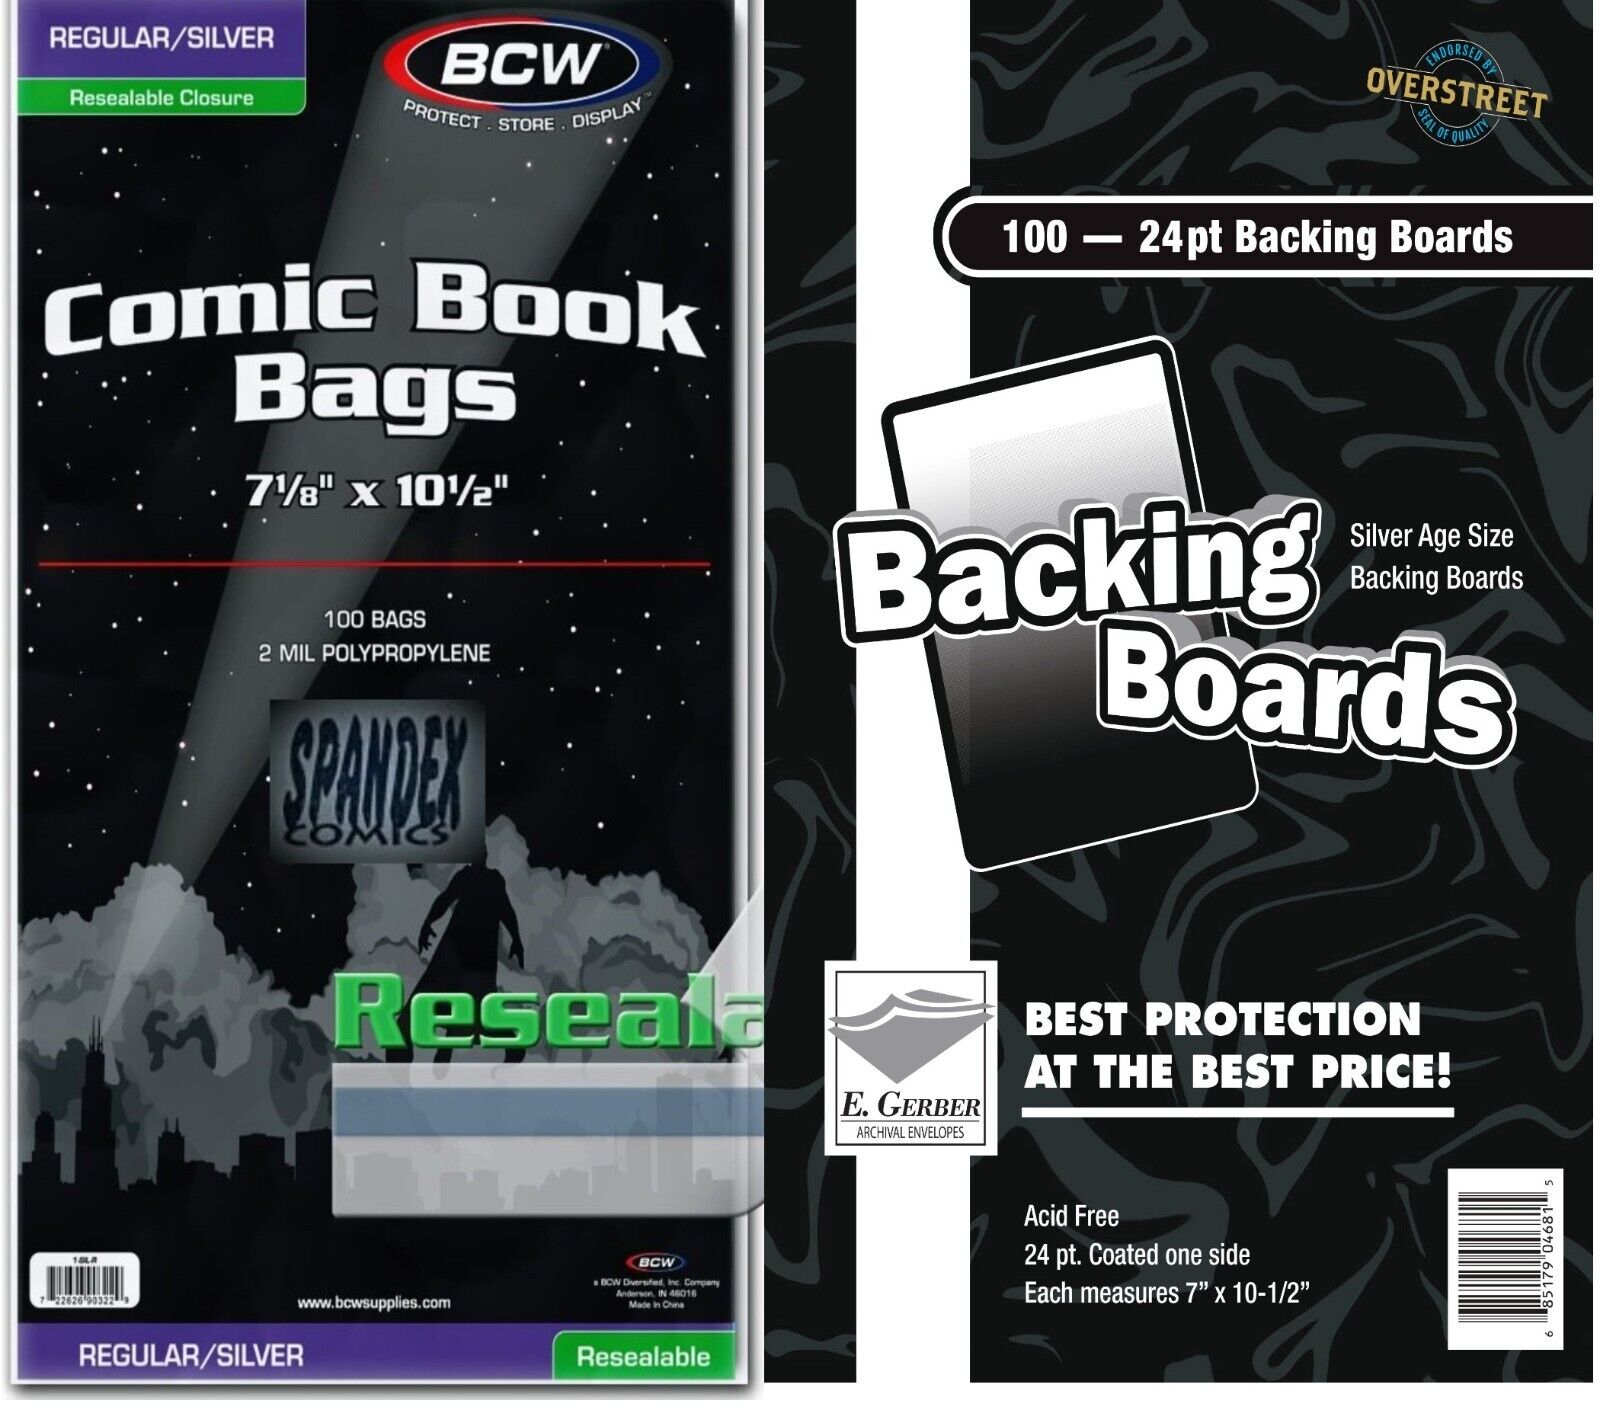 100 Silver Age BCW 2 Mil Resealable Comic Book Bags & E Gerber Backing Board Set